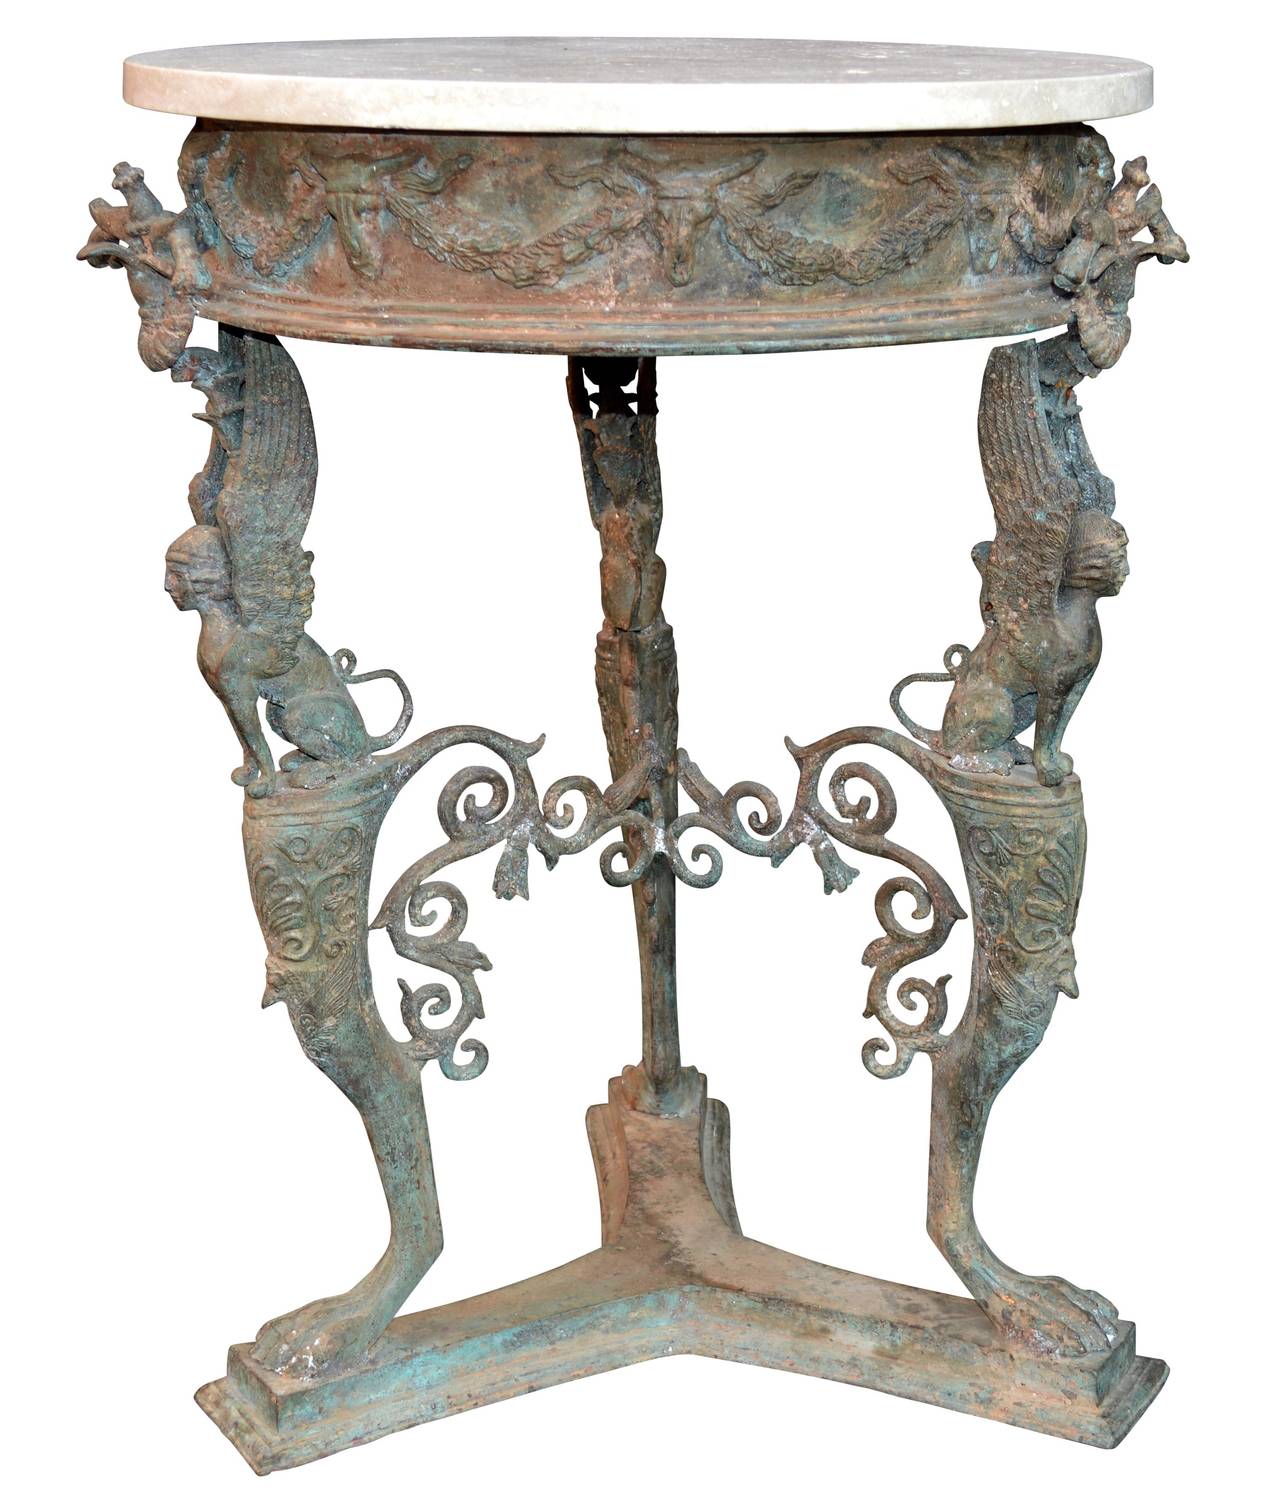 Excellent and stunning late 19th century bronze reproduction of the fantastic guéridon bronze table or jardinière, excavated form the Roman Temple of Isis, Pompeii during the 18th century.